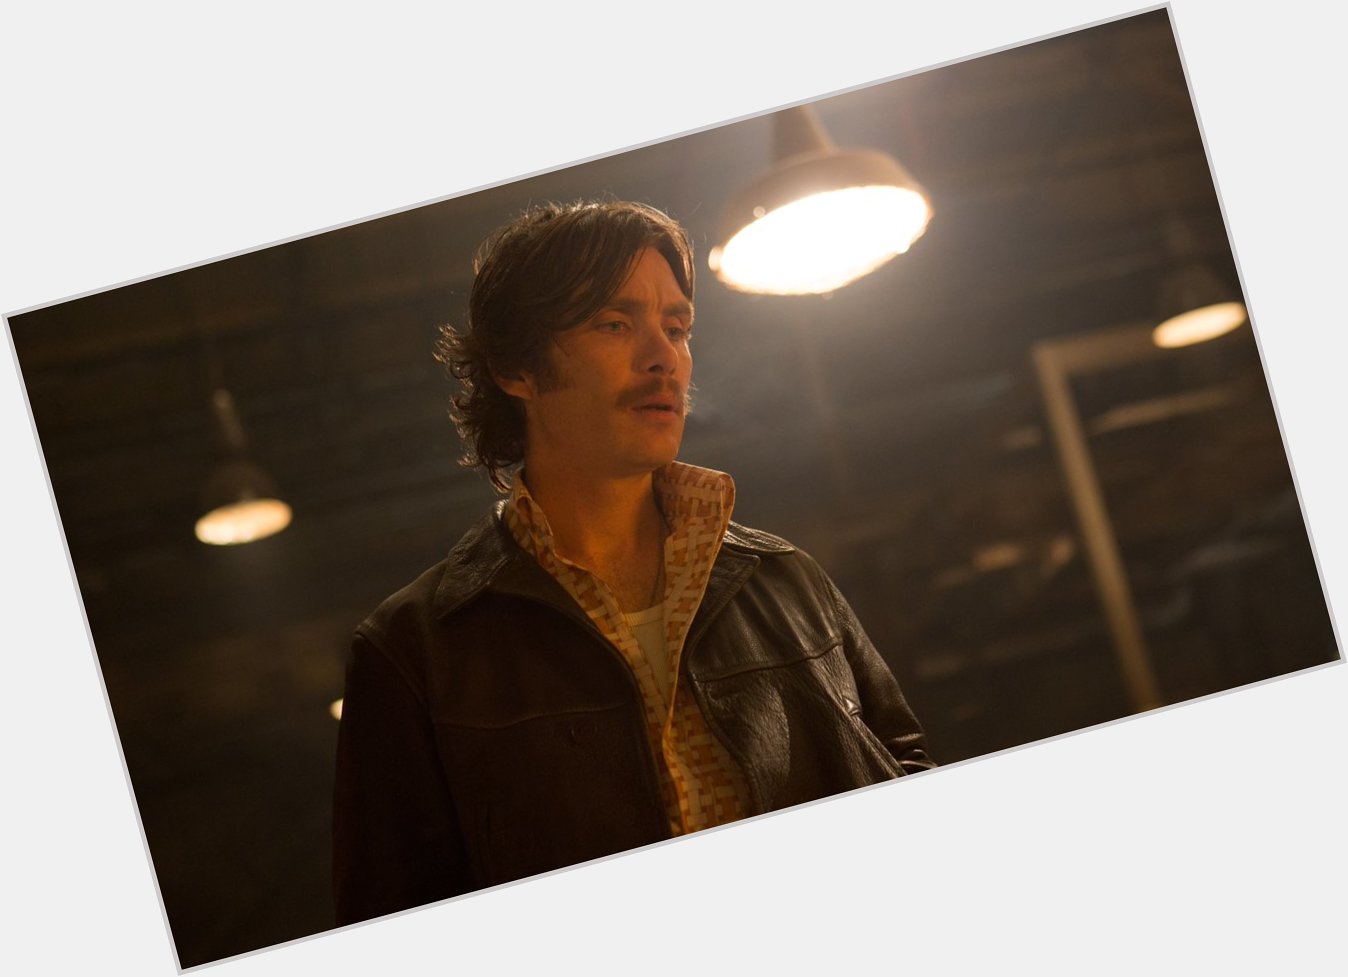 One of the best to do it. Happy Birthday to Cillian Murphy - pictured in Free Fire (2017). 